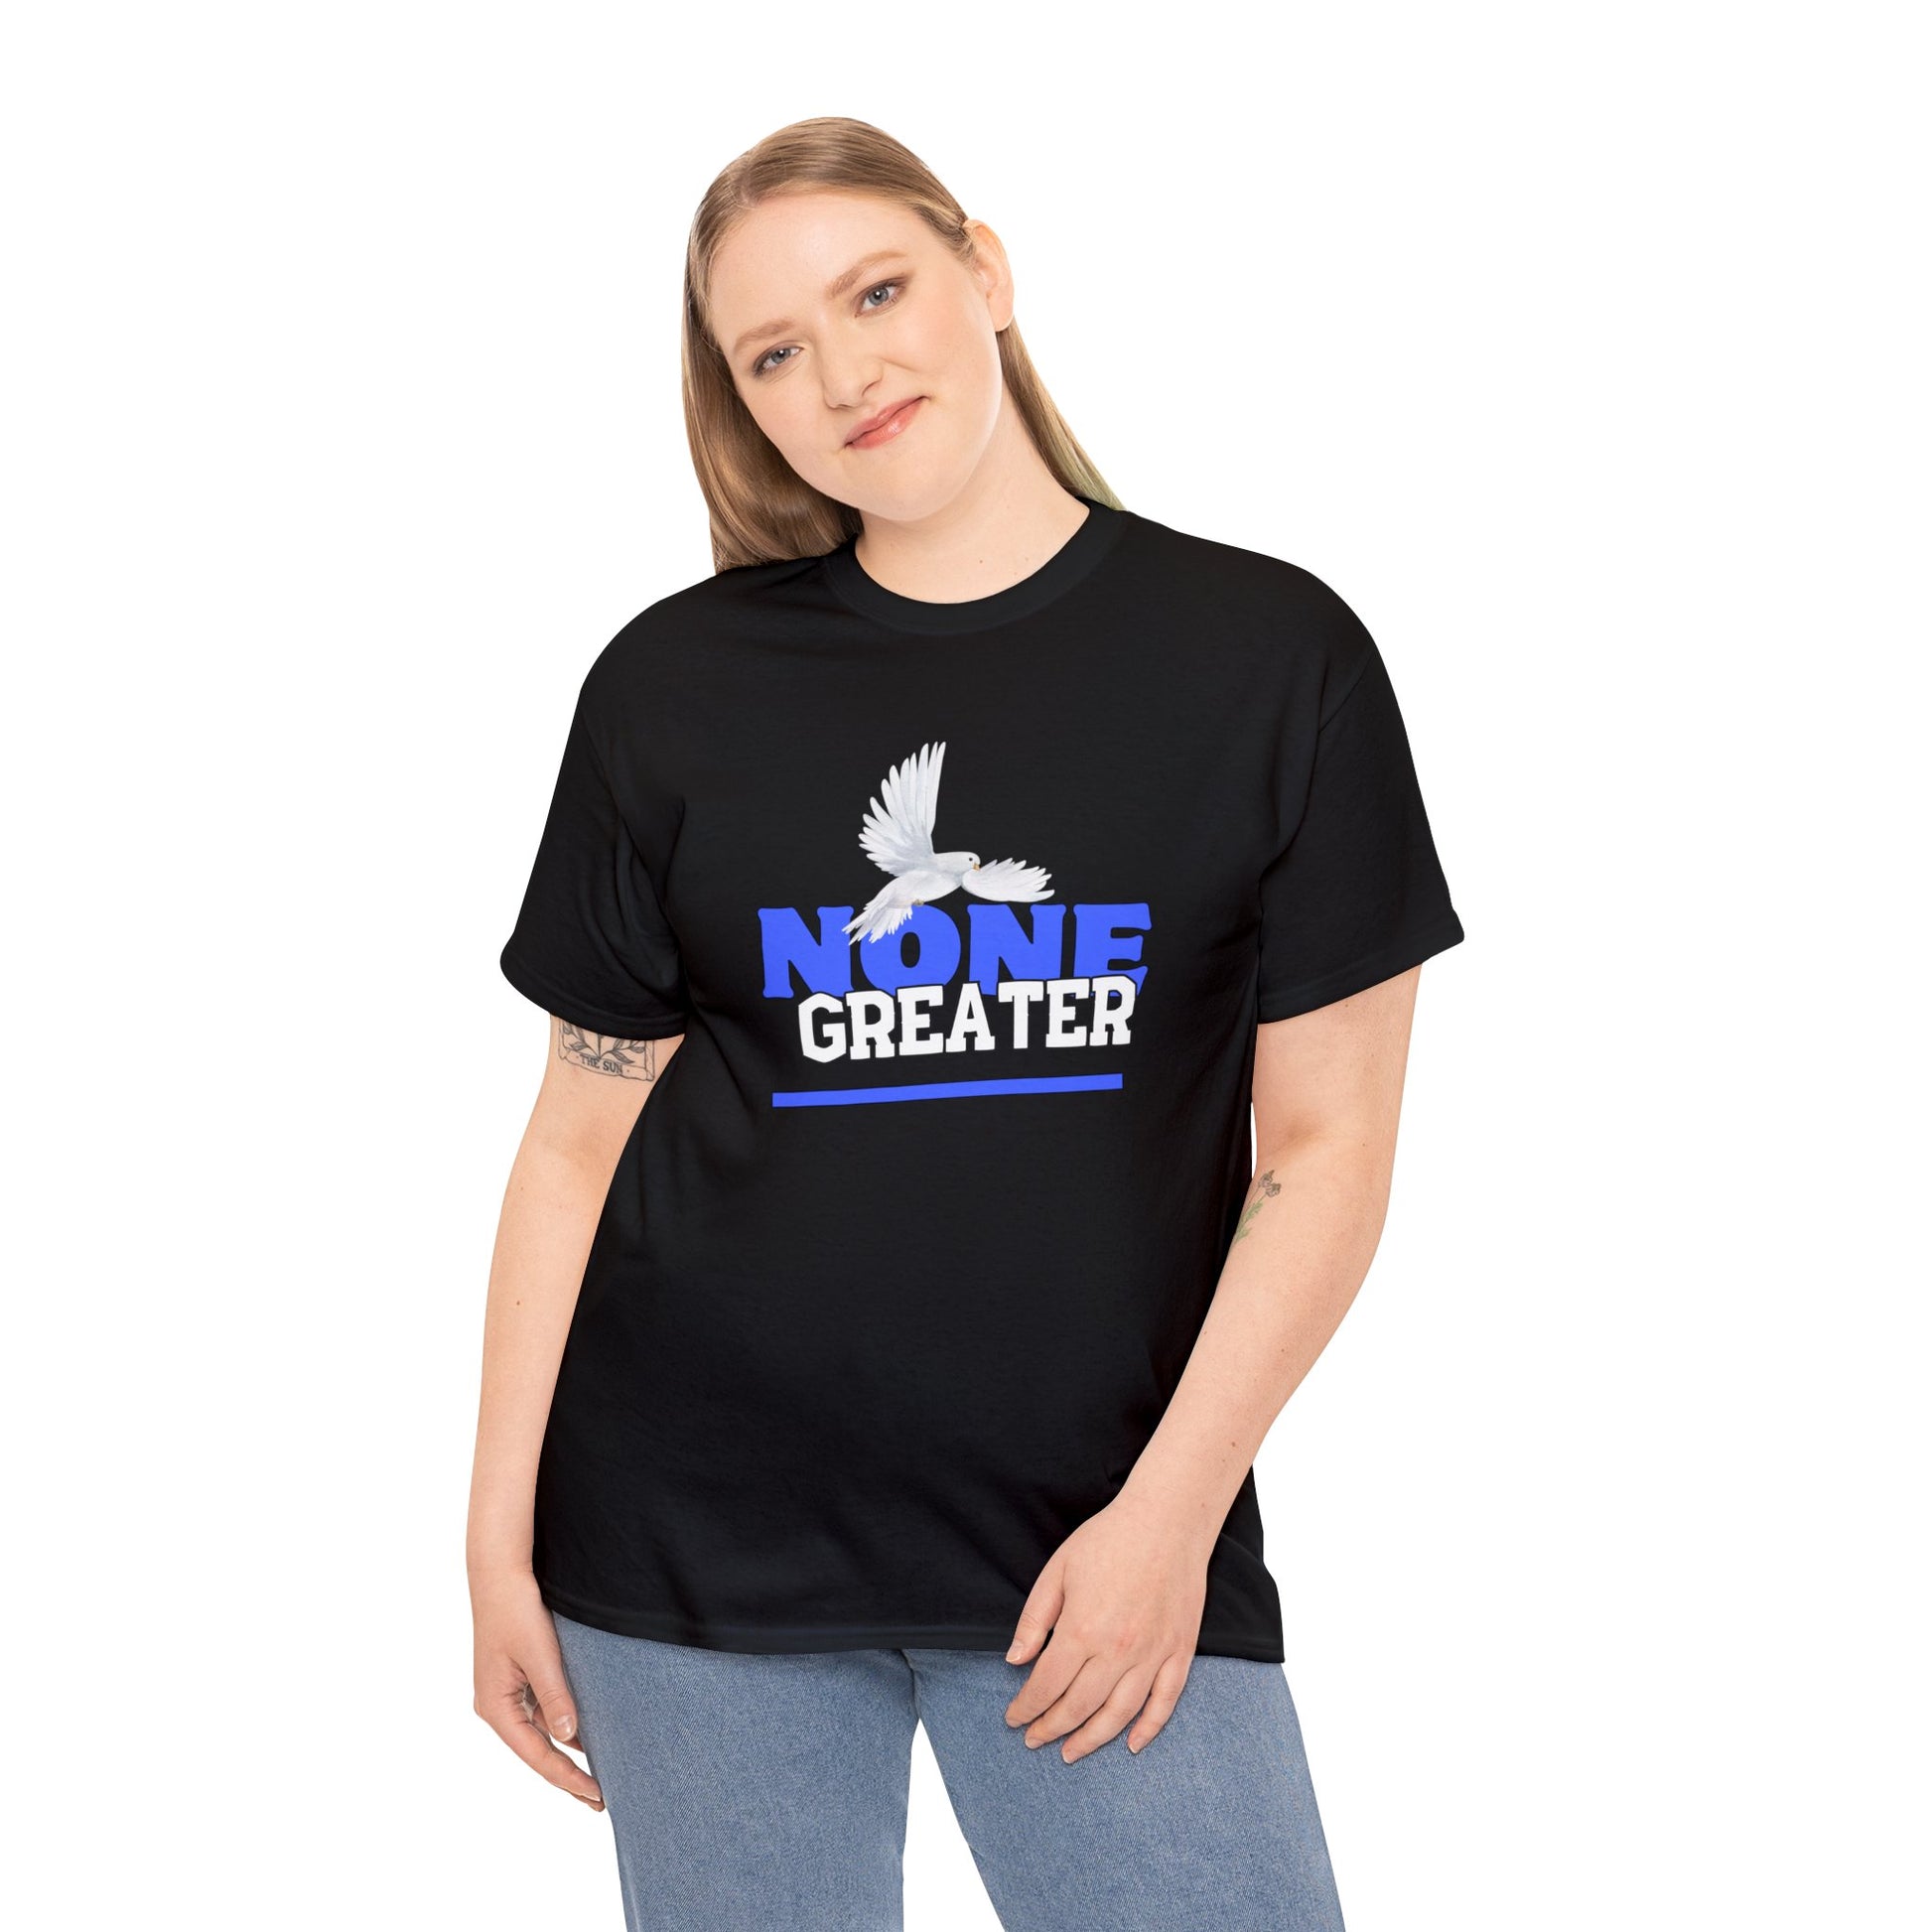 Black Unisex Heavy Cotton Tee w/ White Dove, Royal Blue and White Letters saying "None Greater"